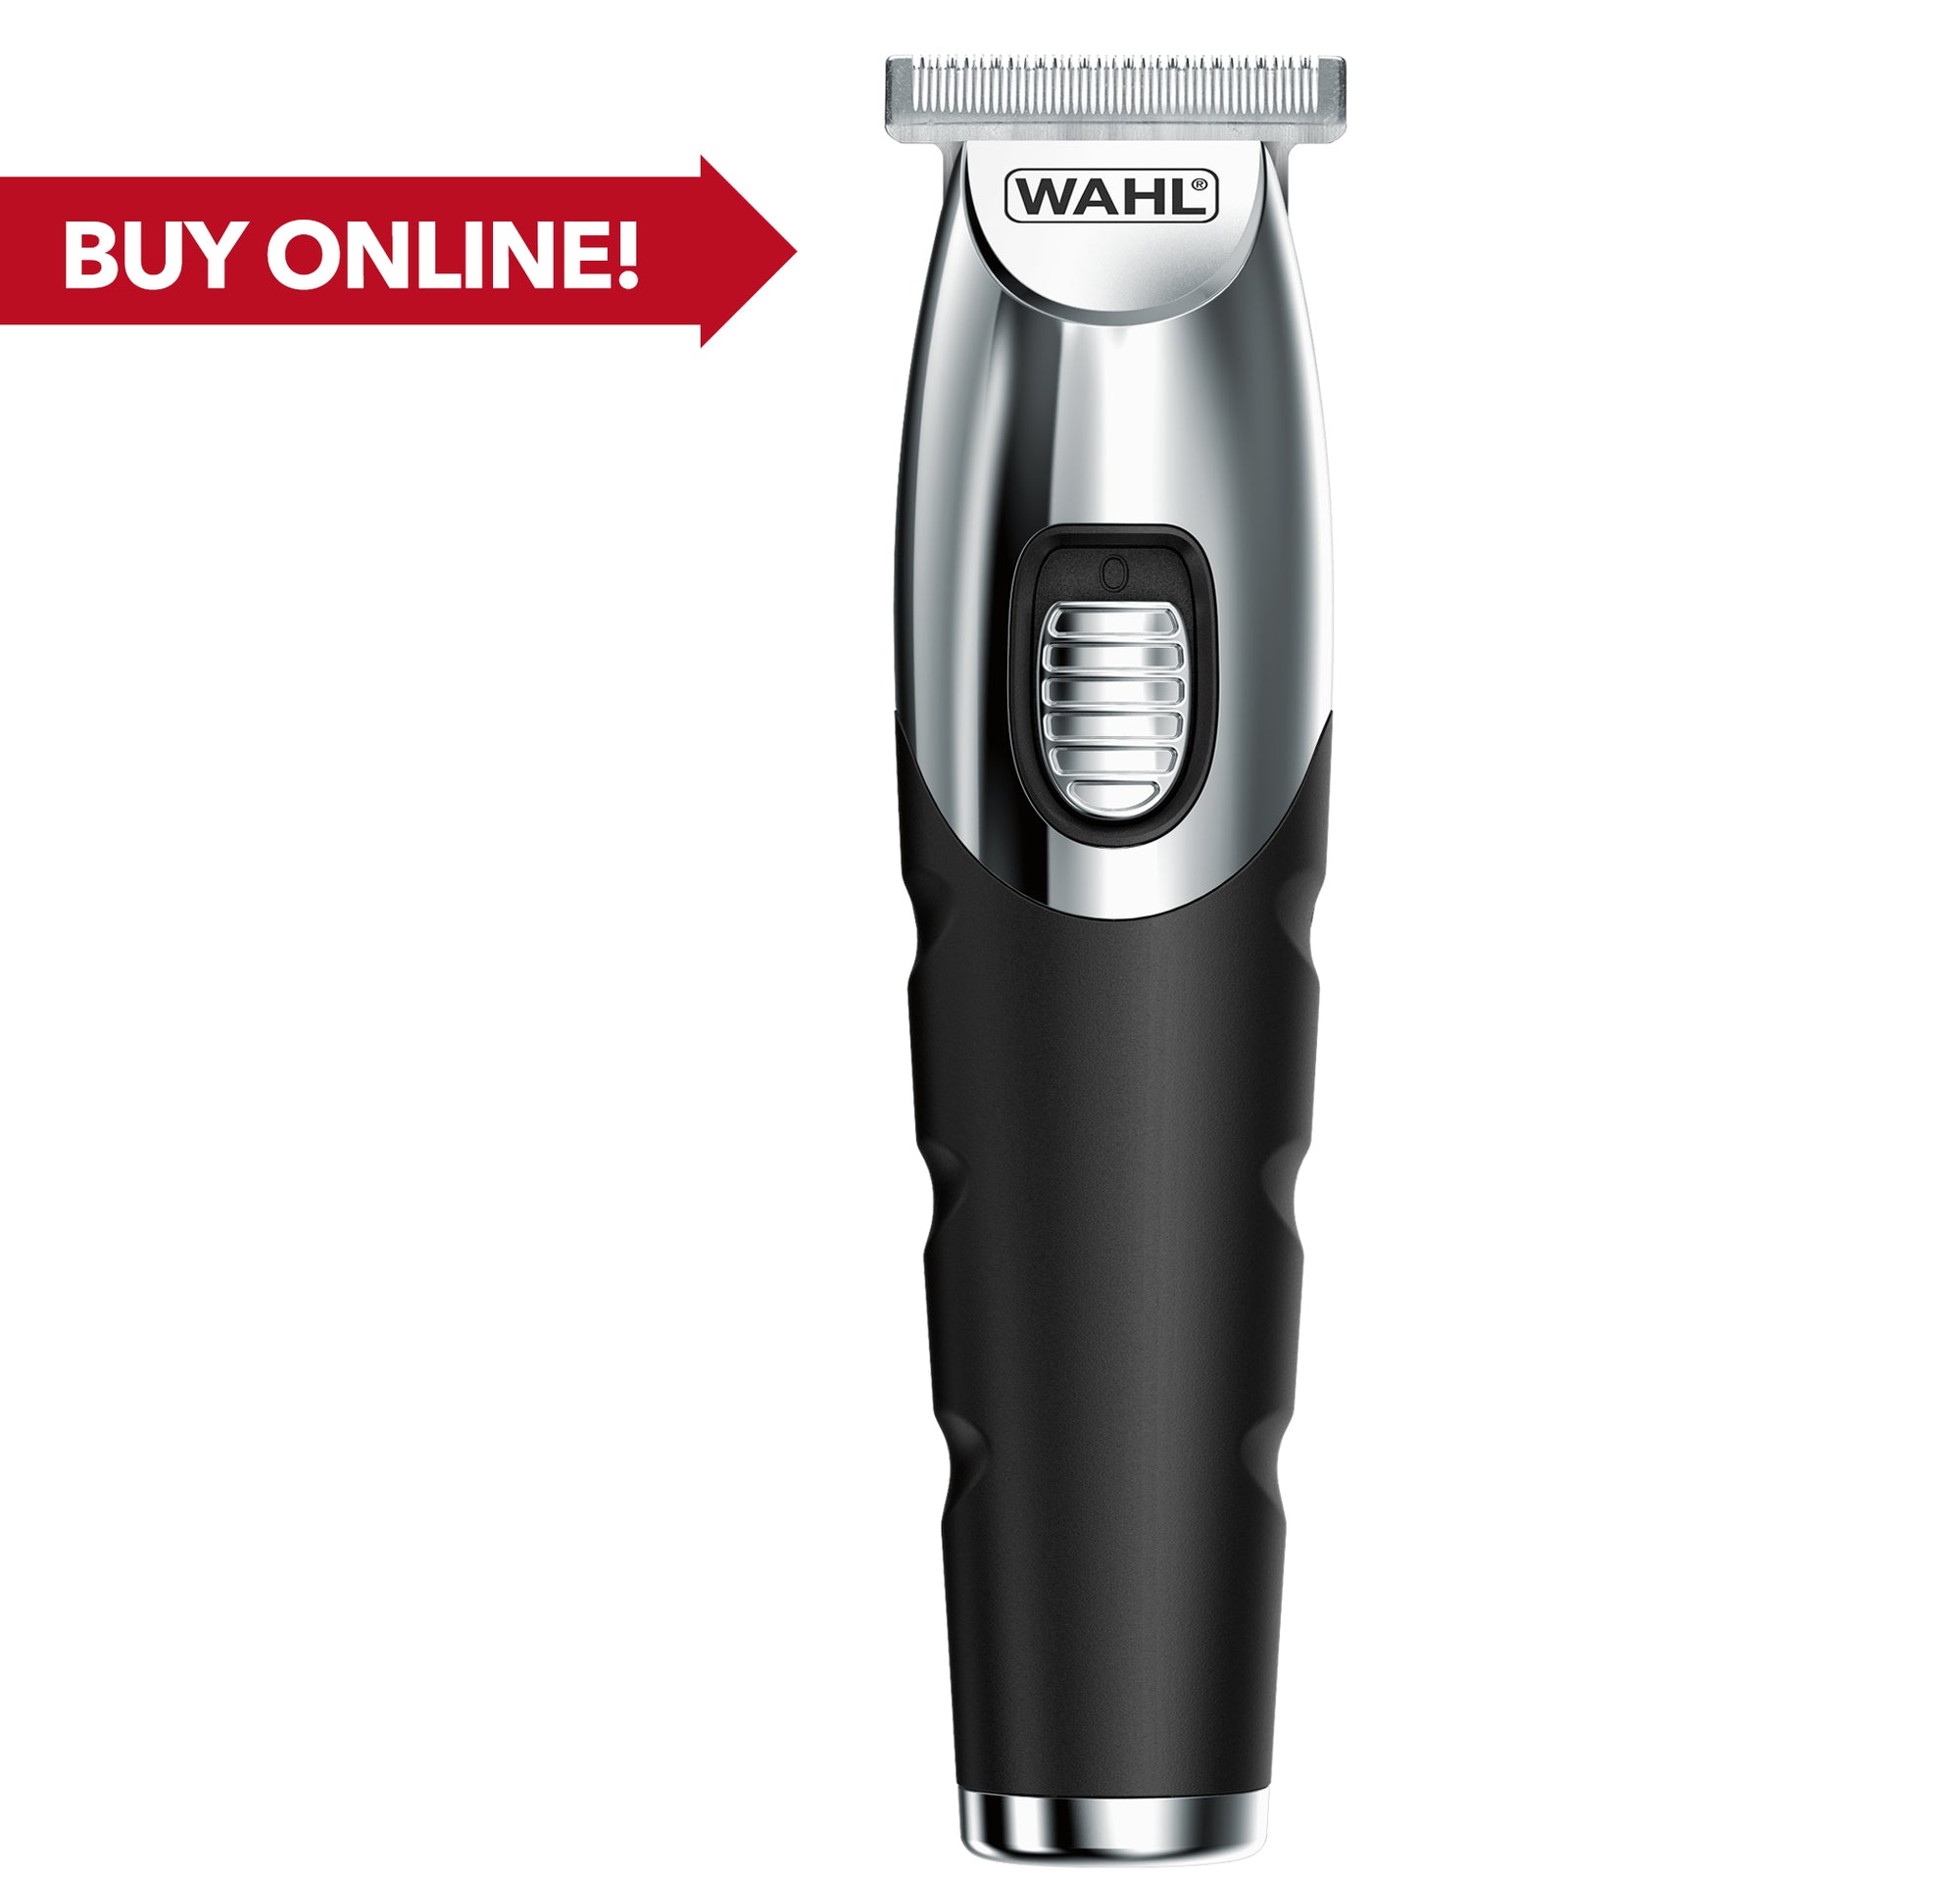 WAHL BEARD &amp; BODY RECHARGEABLE GROOMING KIT